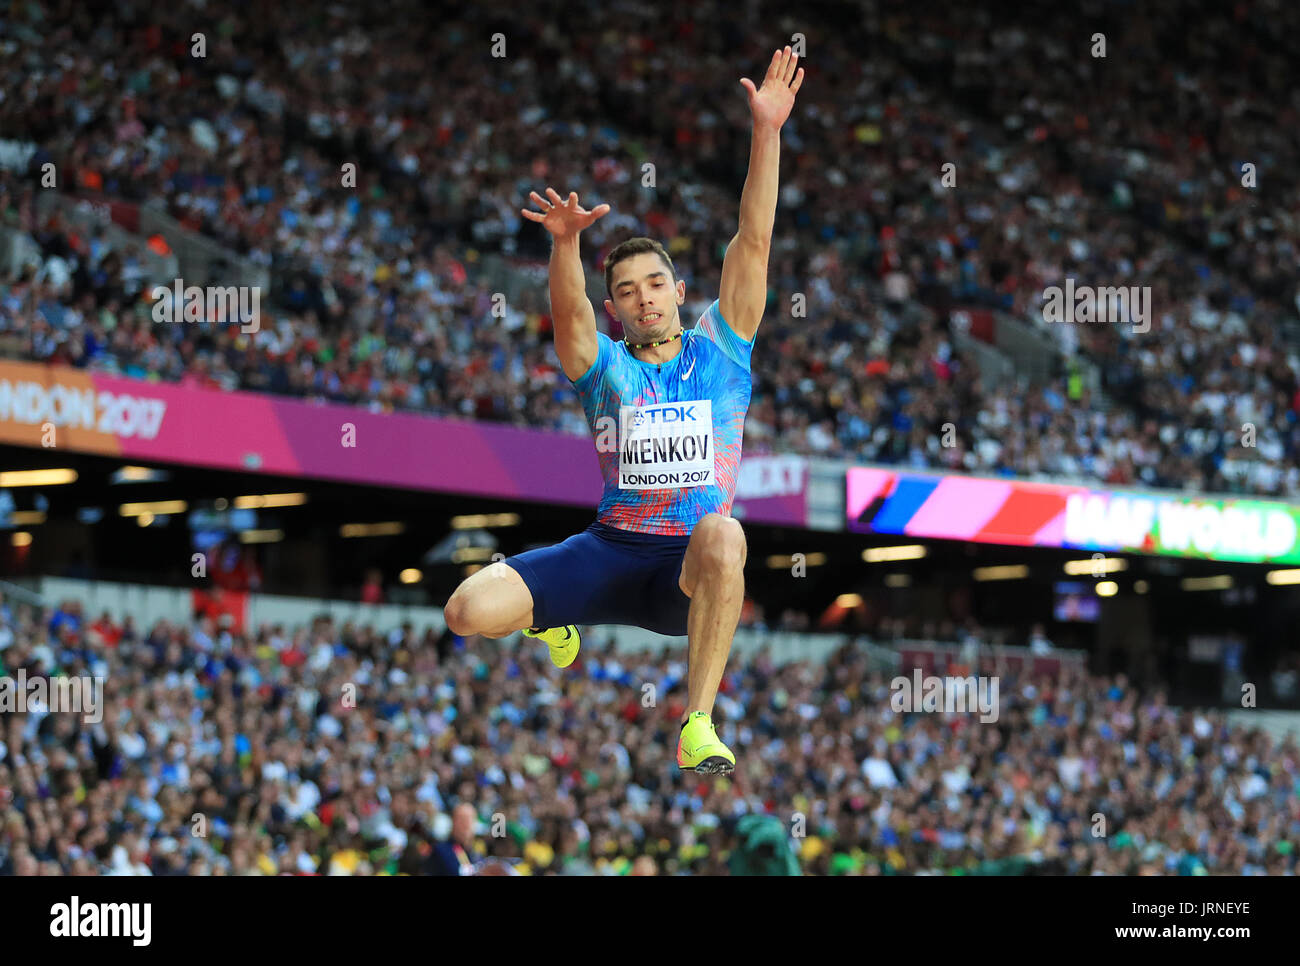 Aleksandr Menkov in action in the Men's Long Jump Final during day two of the 2017 IAAF World Championships at the London Stadium. Stock Photo